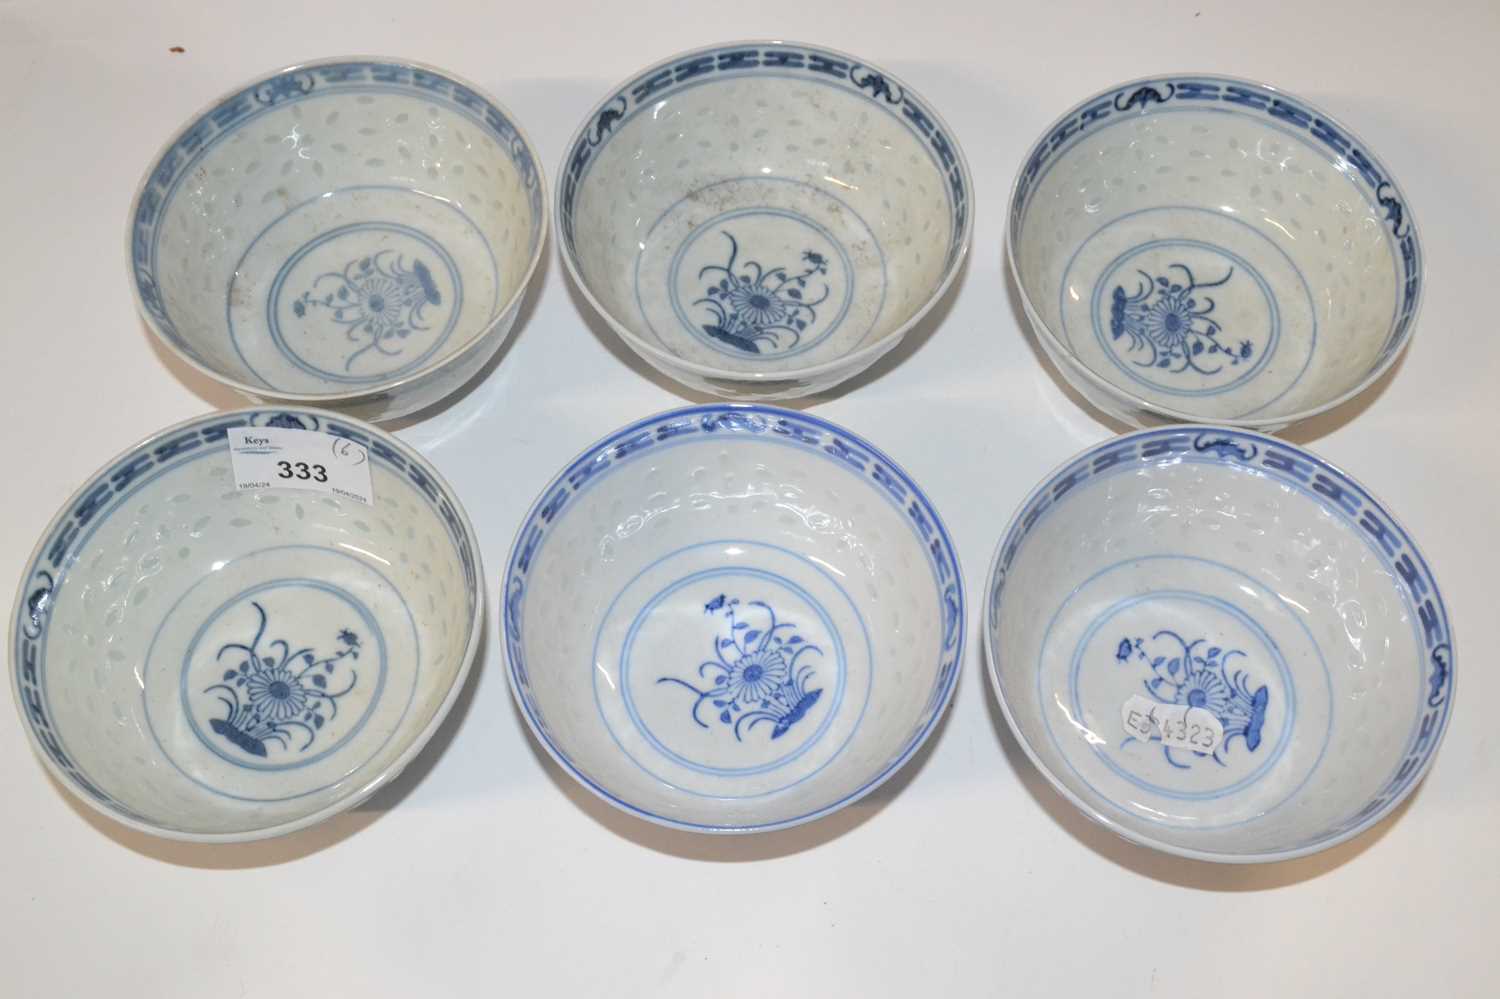 A group of six Chinese bowls, all with a rice grain design, the bowls 12cm diameter - Image 2 of 3